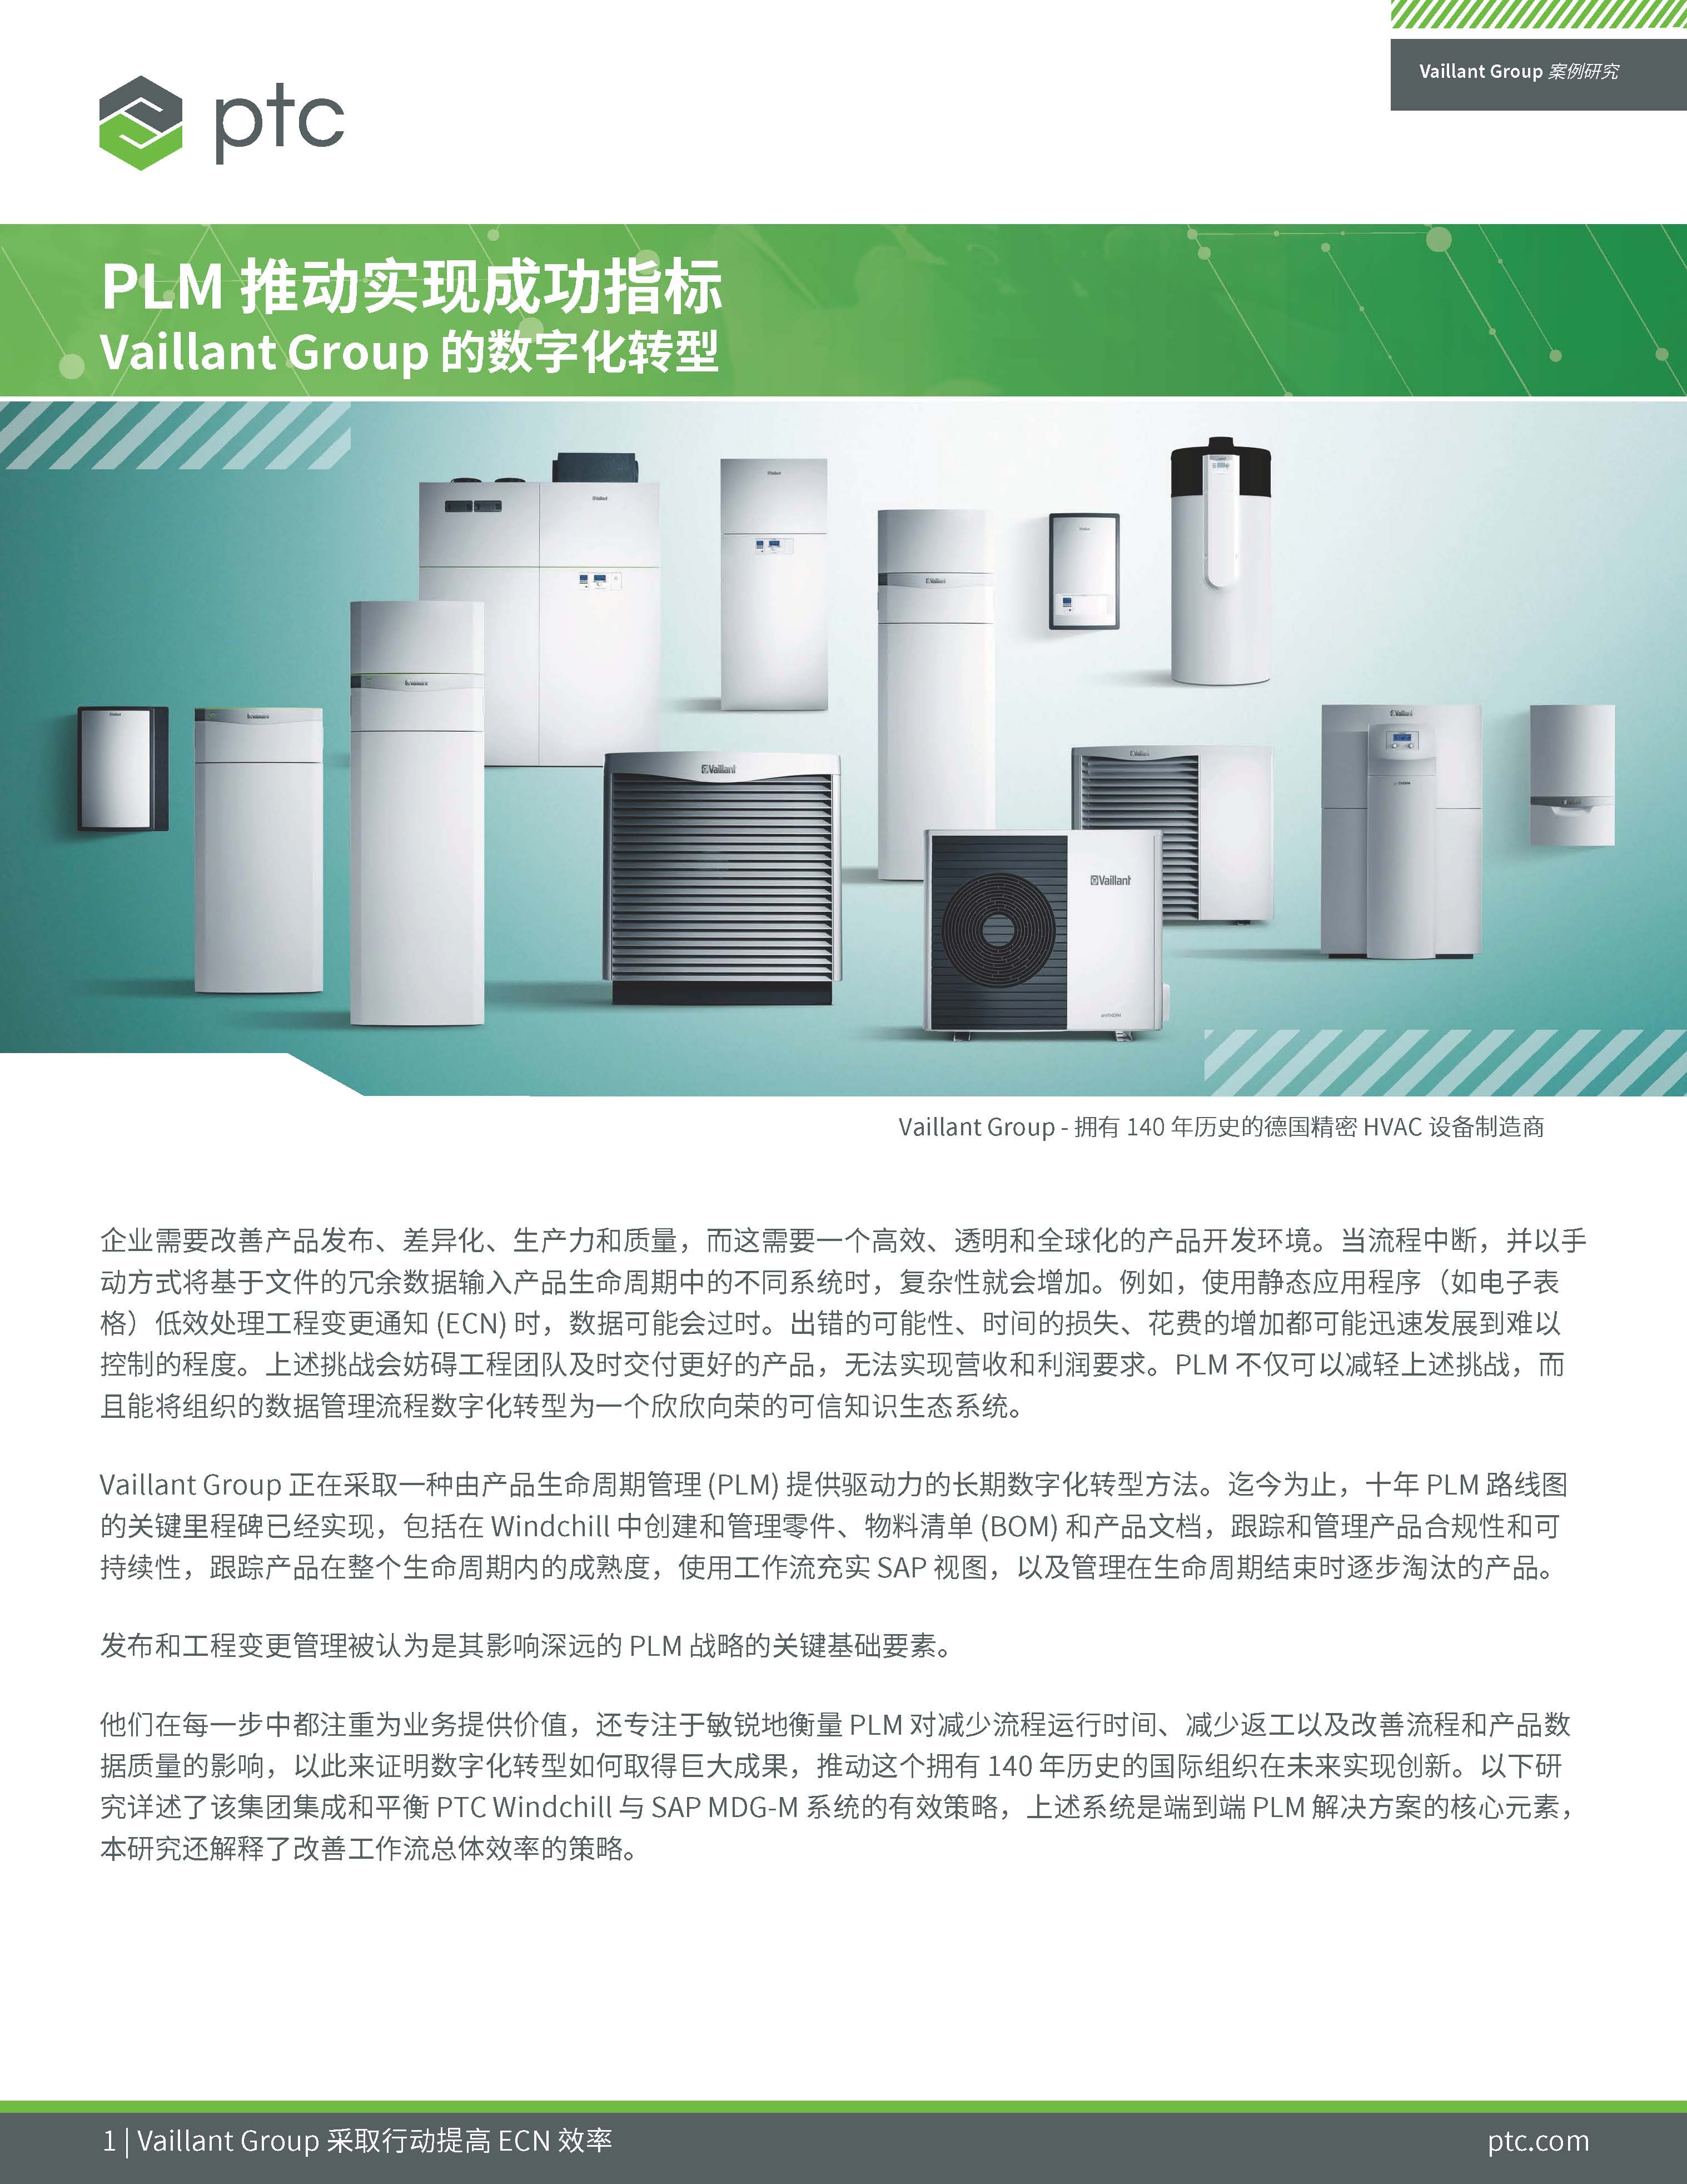 Vaillant Group's Digital Transformation (Chinese)_页面_01.jpg